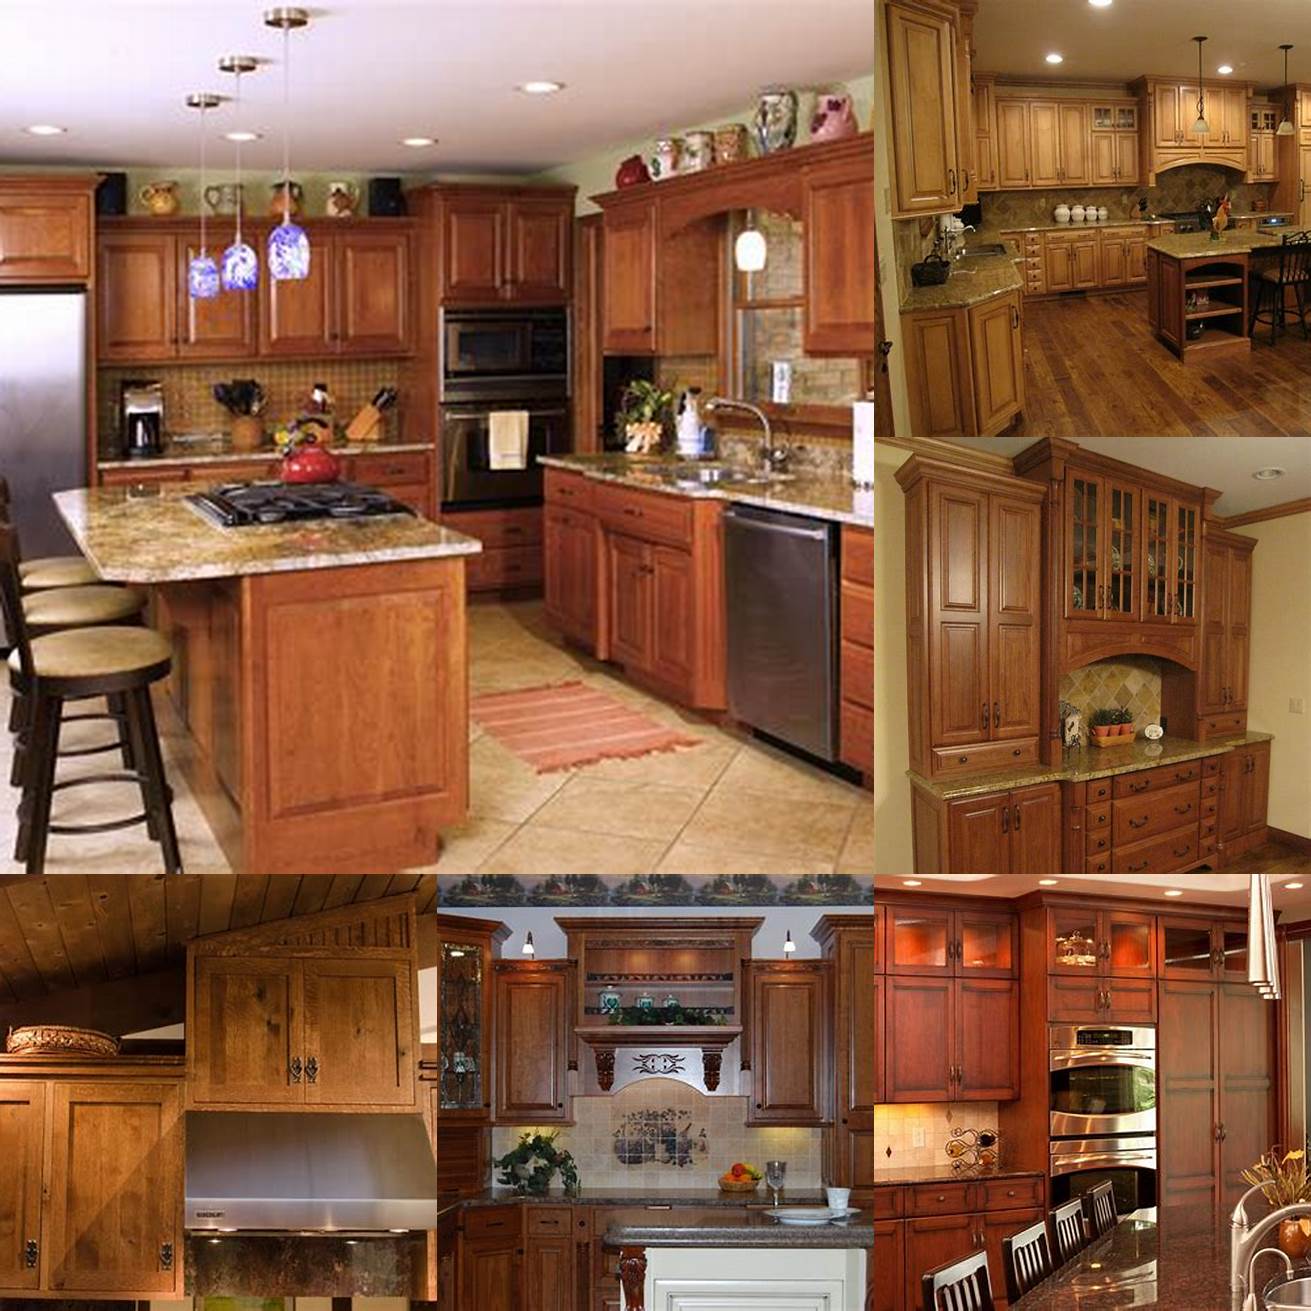 Amish kitchen cabinets in different wood types